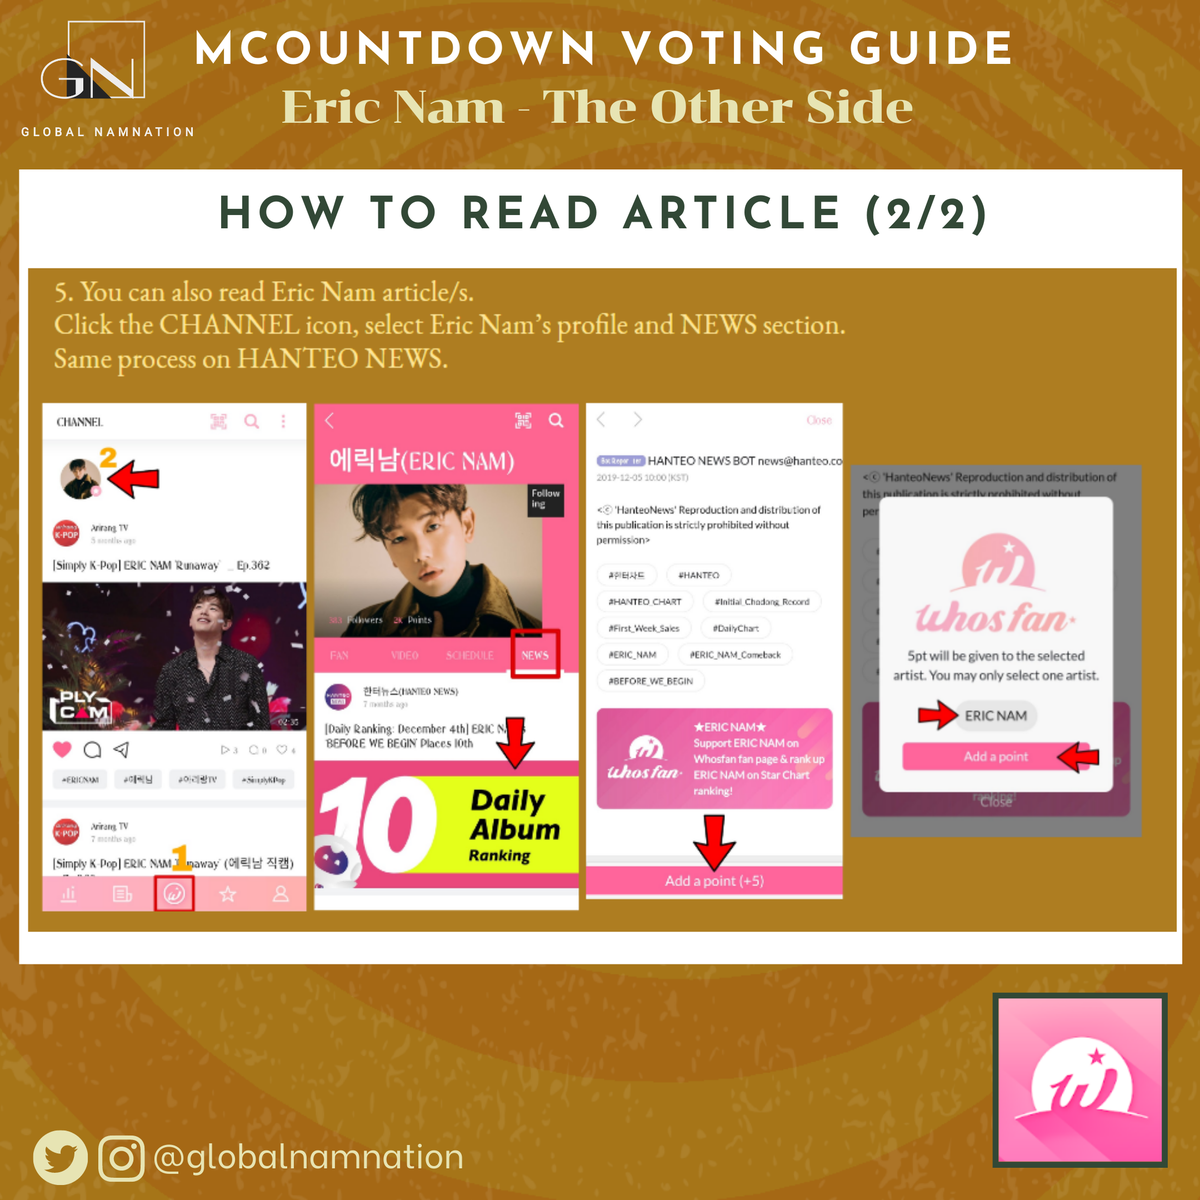 WHOSFAN   #VotingGuide (2/3) #EricNamScheduleEric Nam's Activities for July 31, 2020.Don't forget to vote Eric Nam on MWAVE and WHOSFAN for MNet Countdown. Please see separate guidelines.  #EricNam  #에릭남  #TheOtherSide  #ParadiseWithEricNam